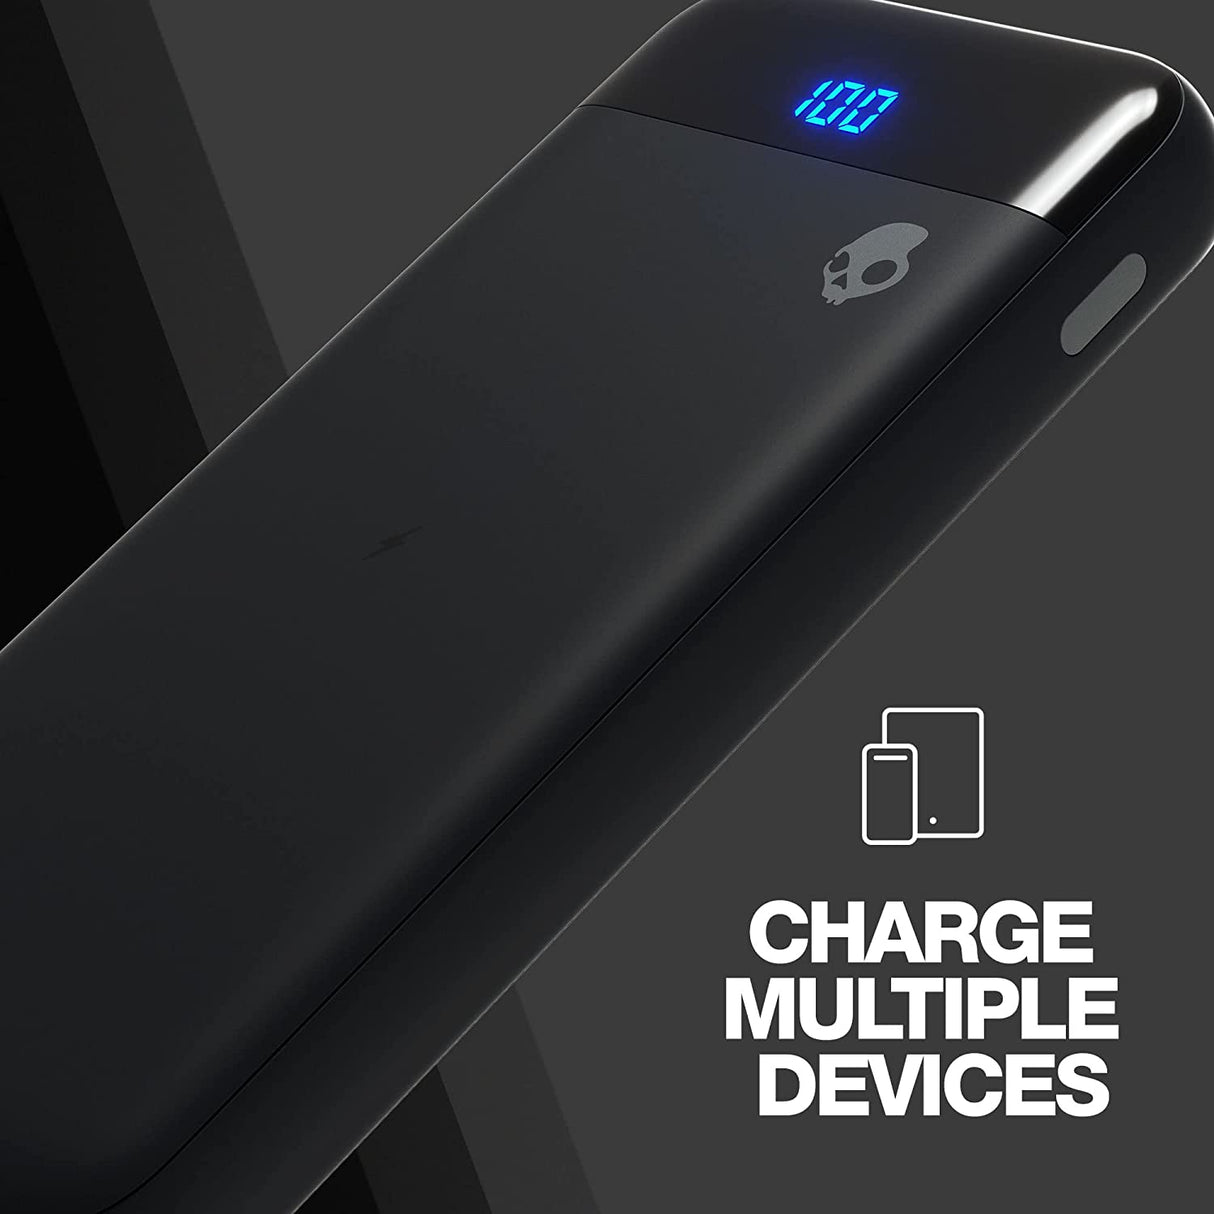 Skullcandy Stash Fuel 10000 mAh Portable Charger, Wireless Charging Power Bank - Black Black 1 Count (Pack of 1) Stash Fuel Charger